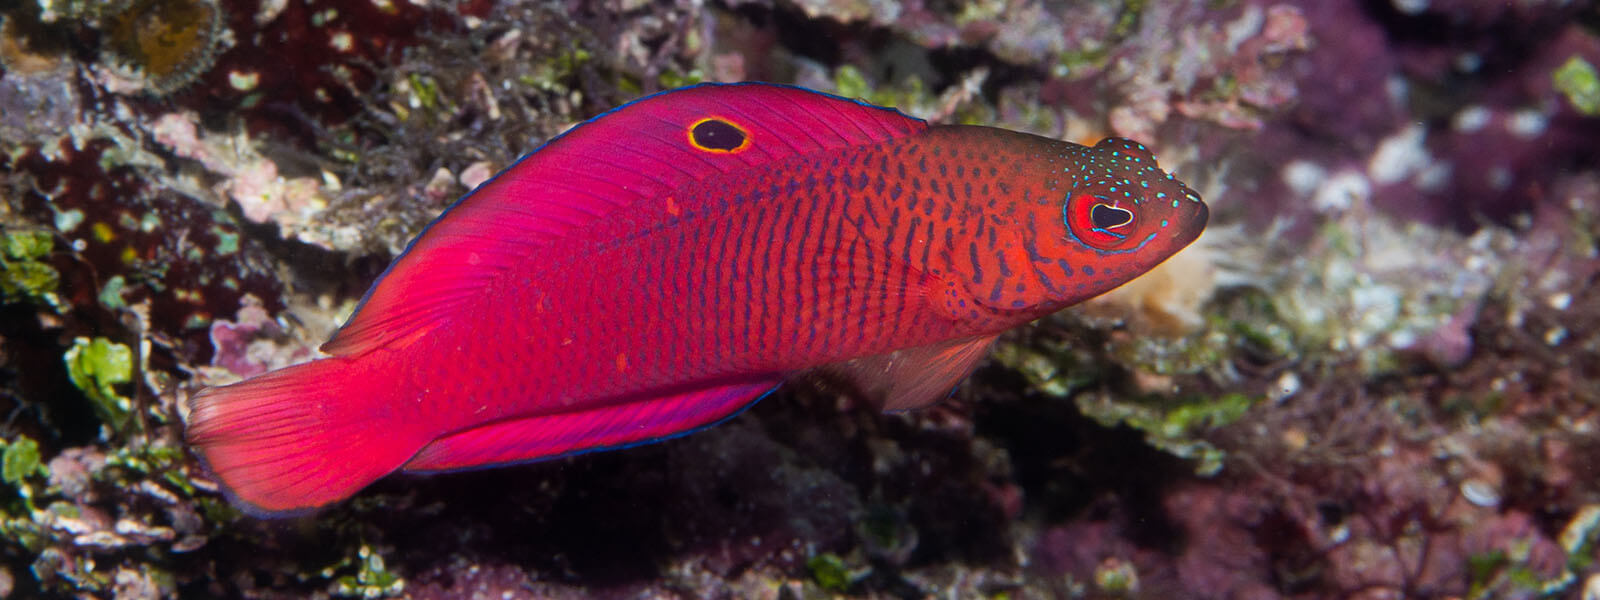 Colorful can be found on our Solomon Islands snorkeling tour